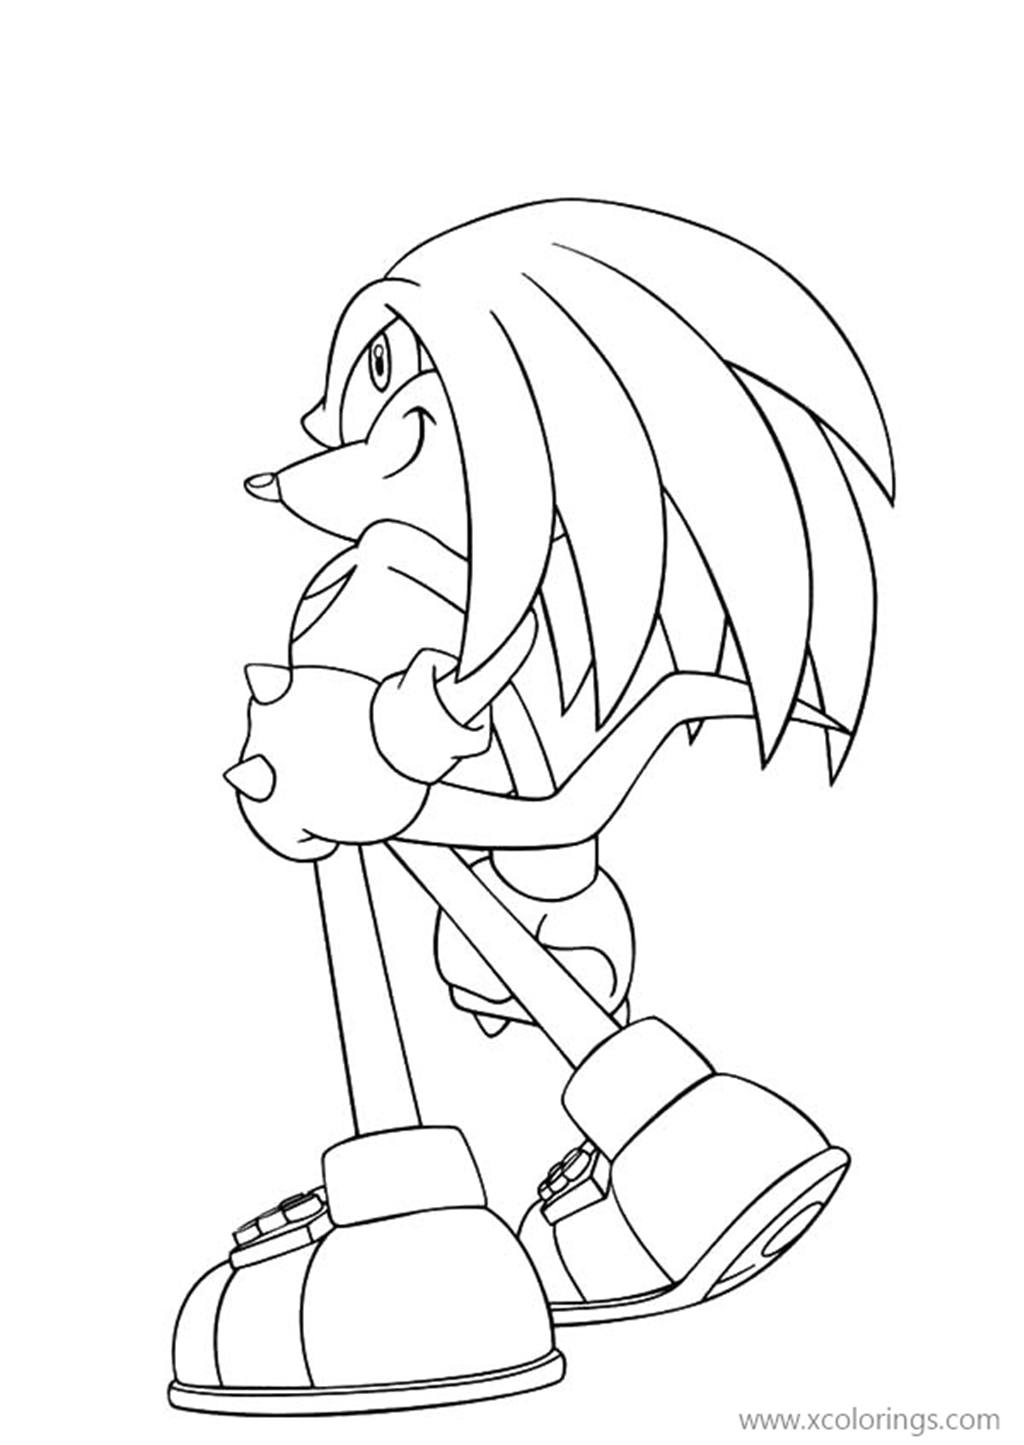 Knuckles The Echidna Coloring Pages from Sonic the Hedgehog